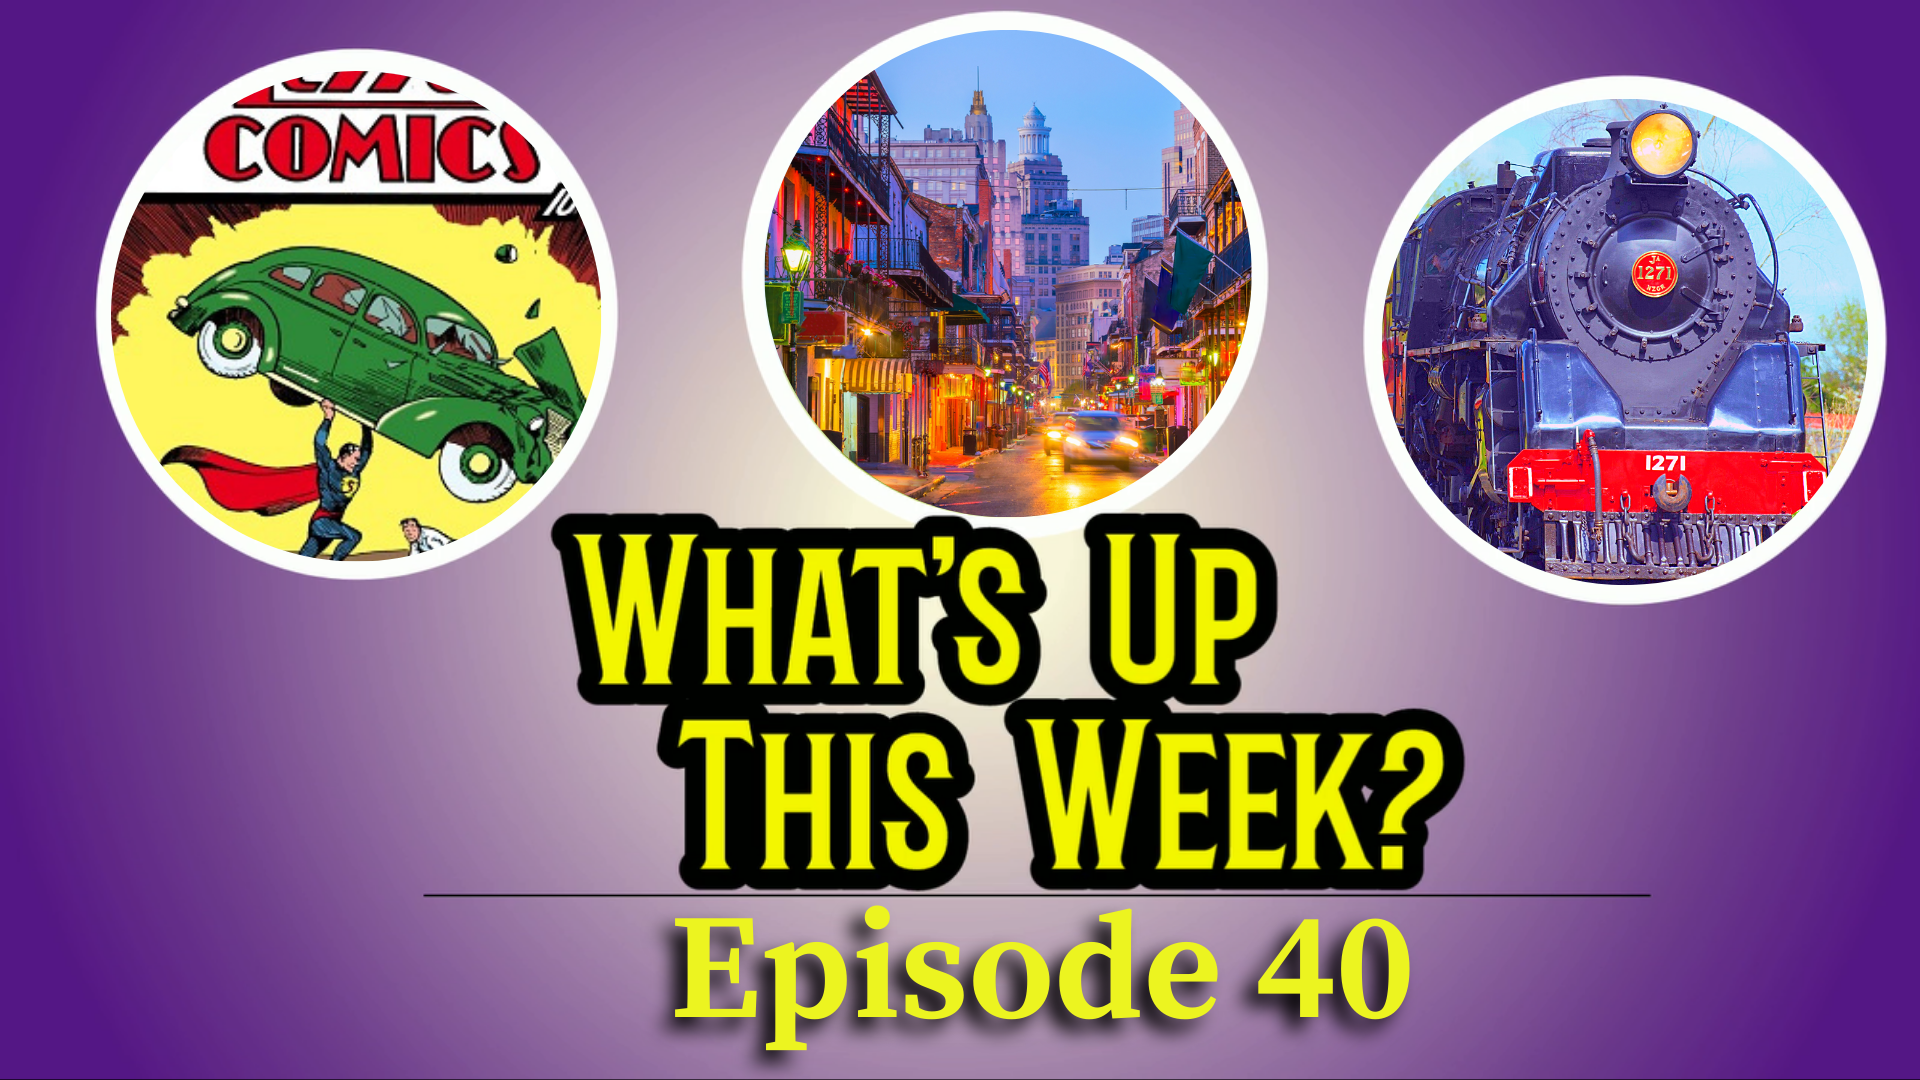 Text: What's Up This Week? Episode 29. 3 images in circles: Superman comic, Bourbon Street, a train.